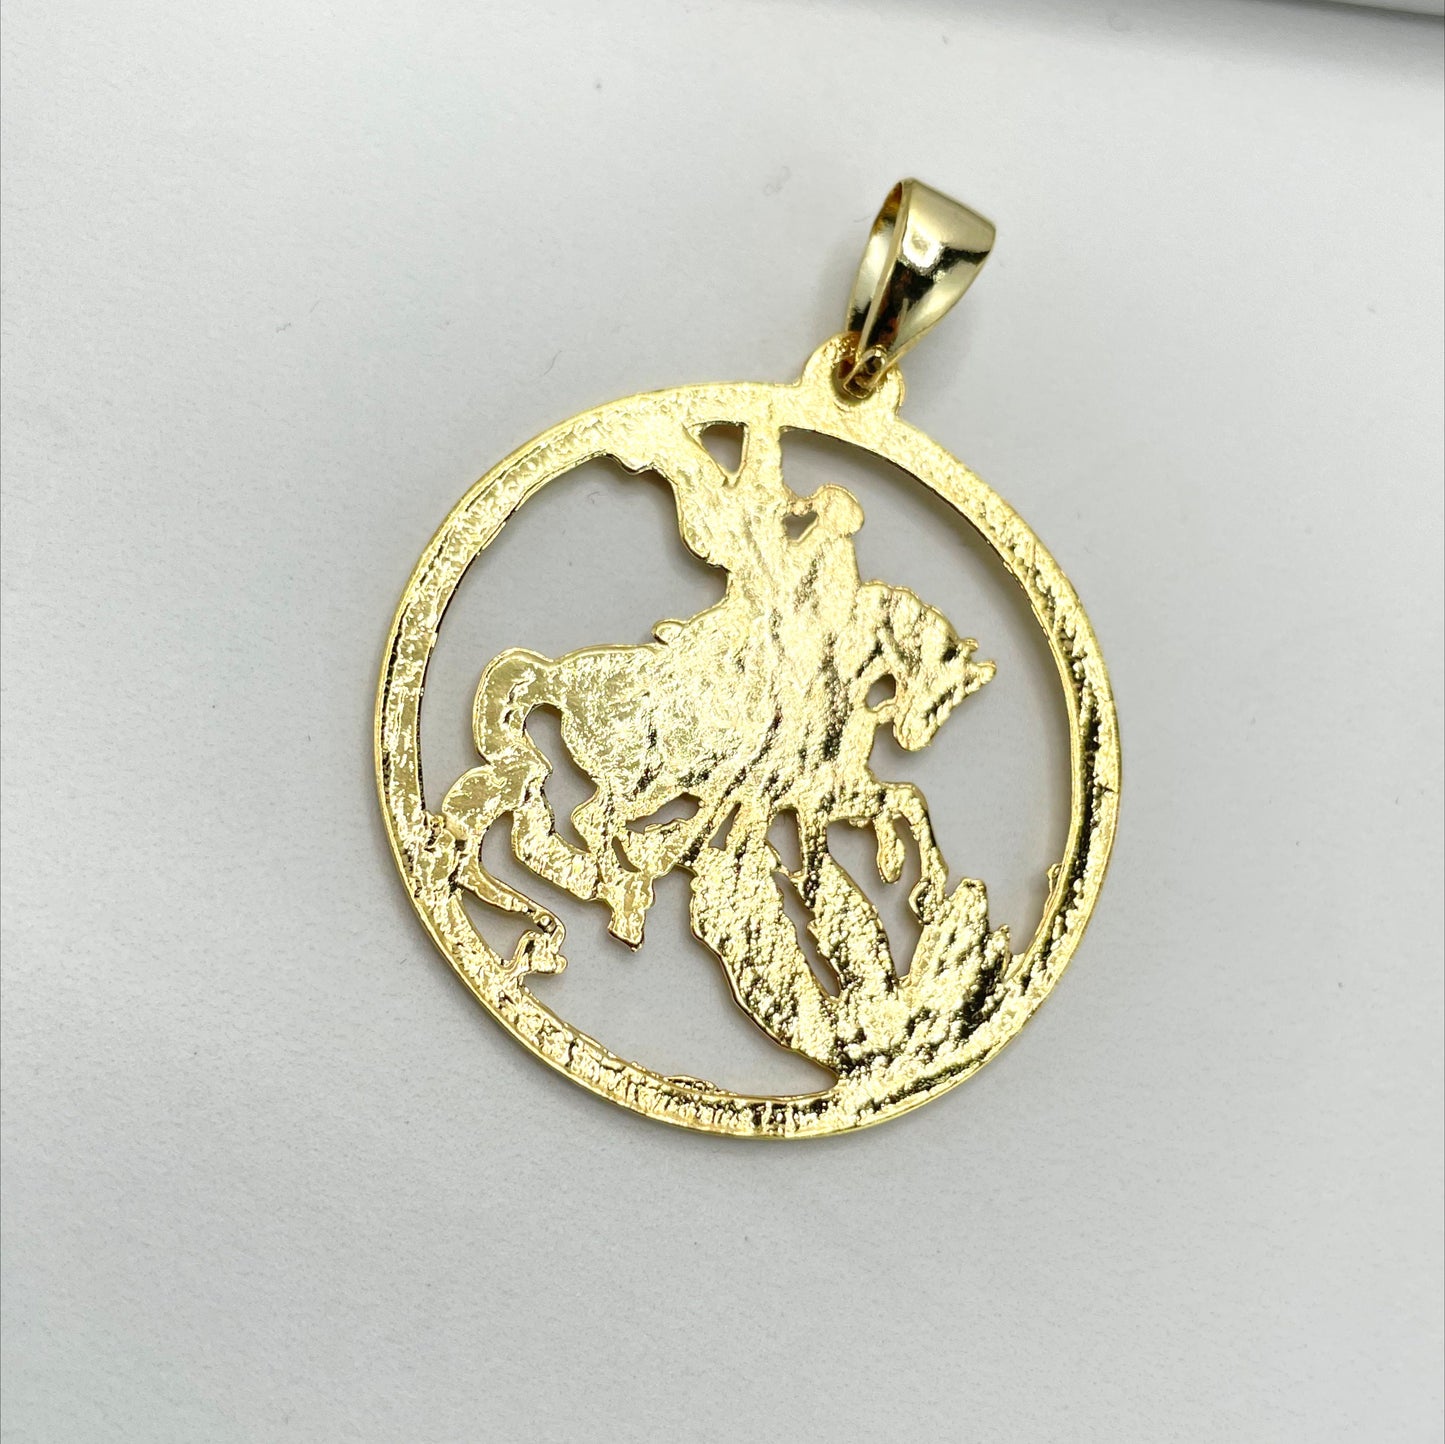 18k Gold Filled Cutout Saint George The Dragon Slayer Religious Pendant Charms Round Medal,  Wholesale Jewelry Making Supplies